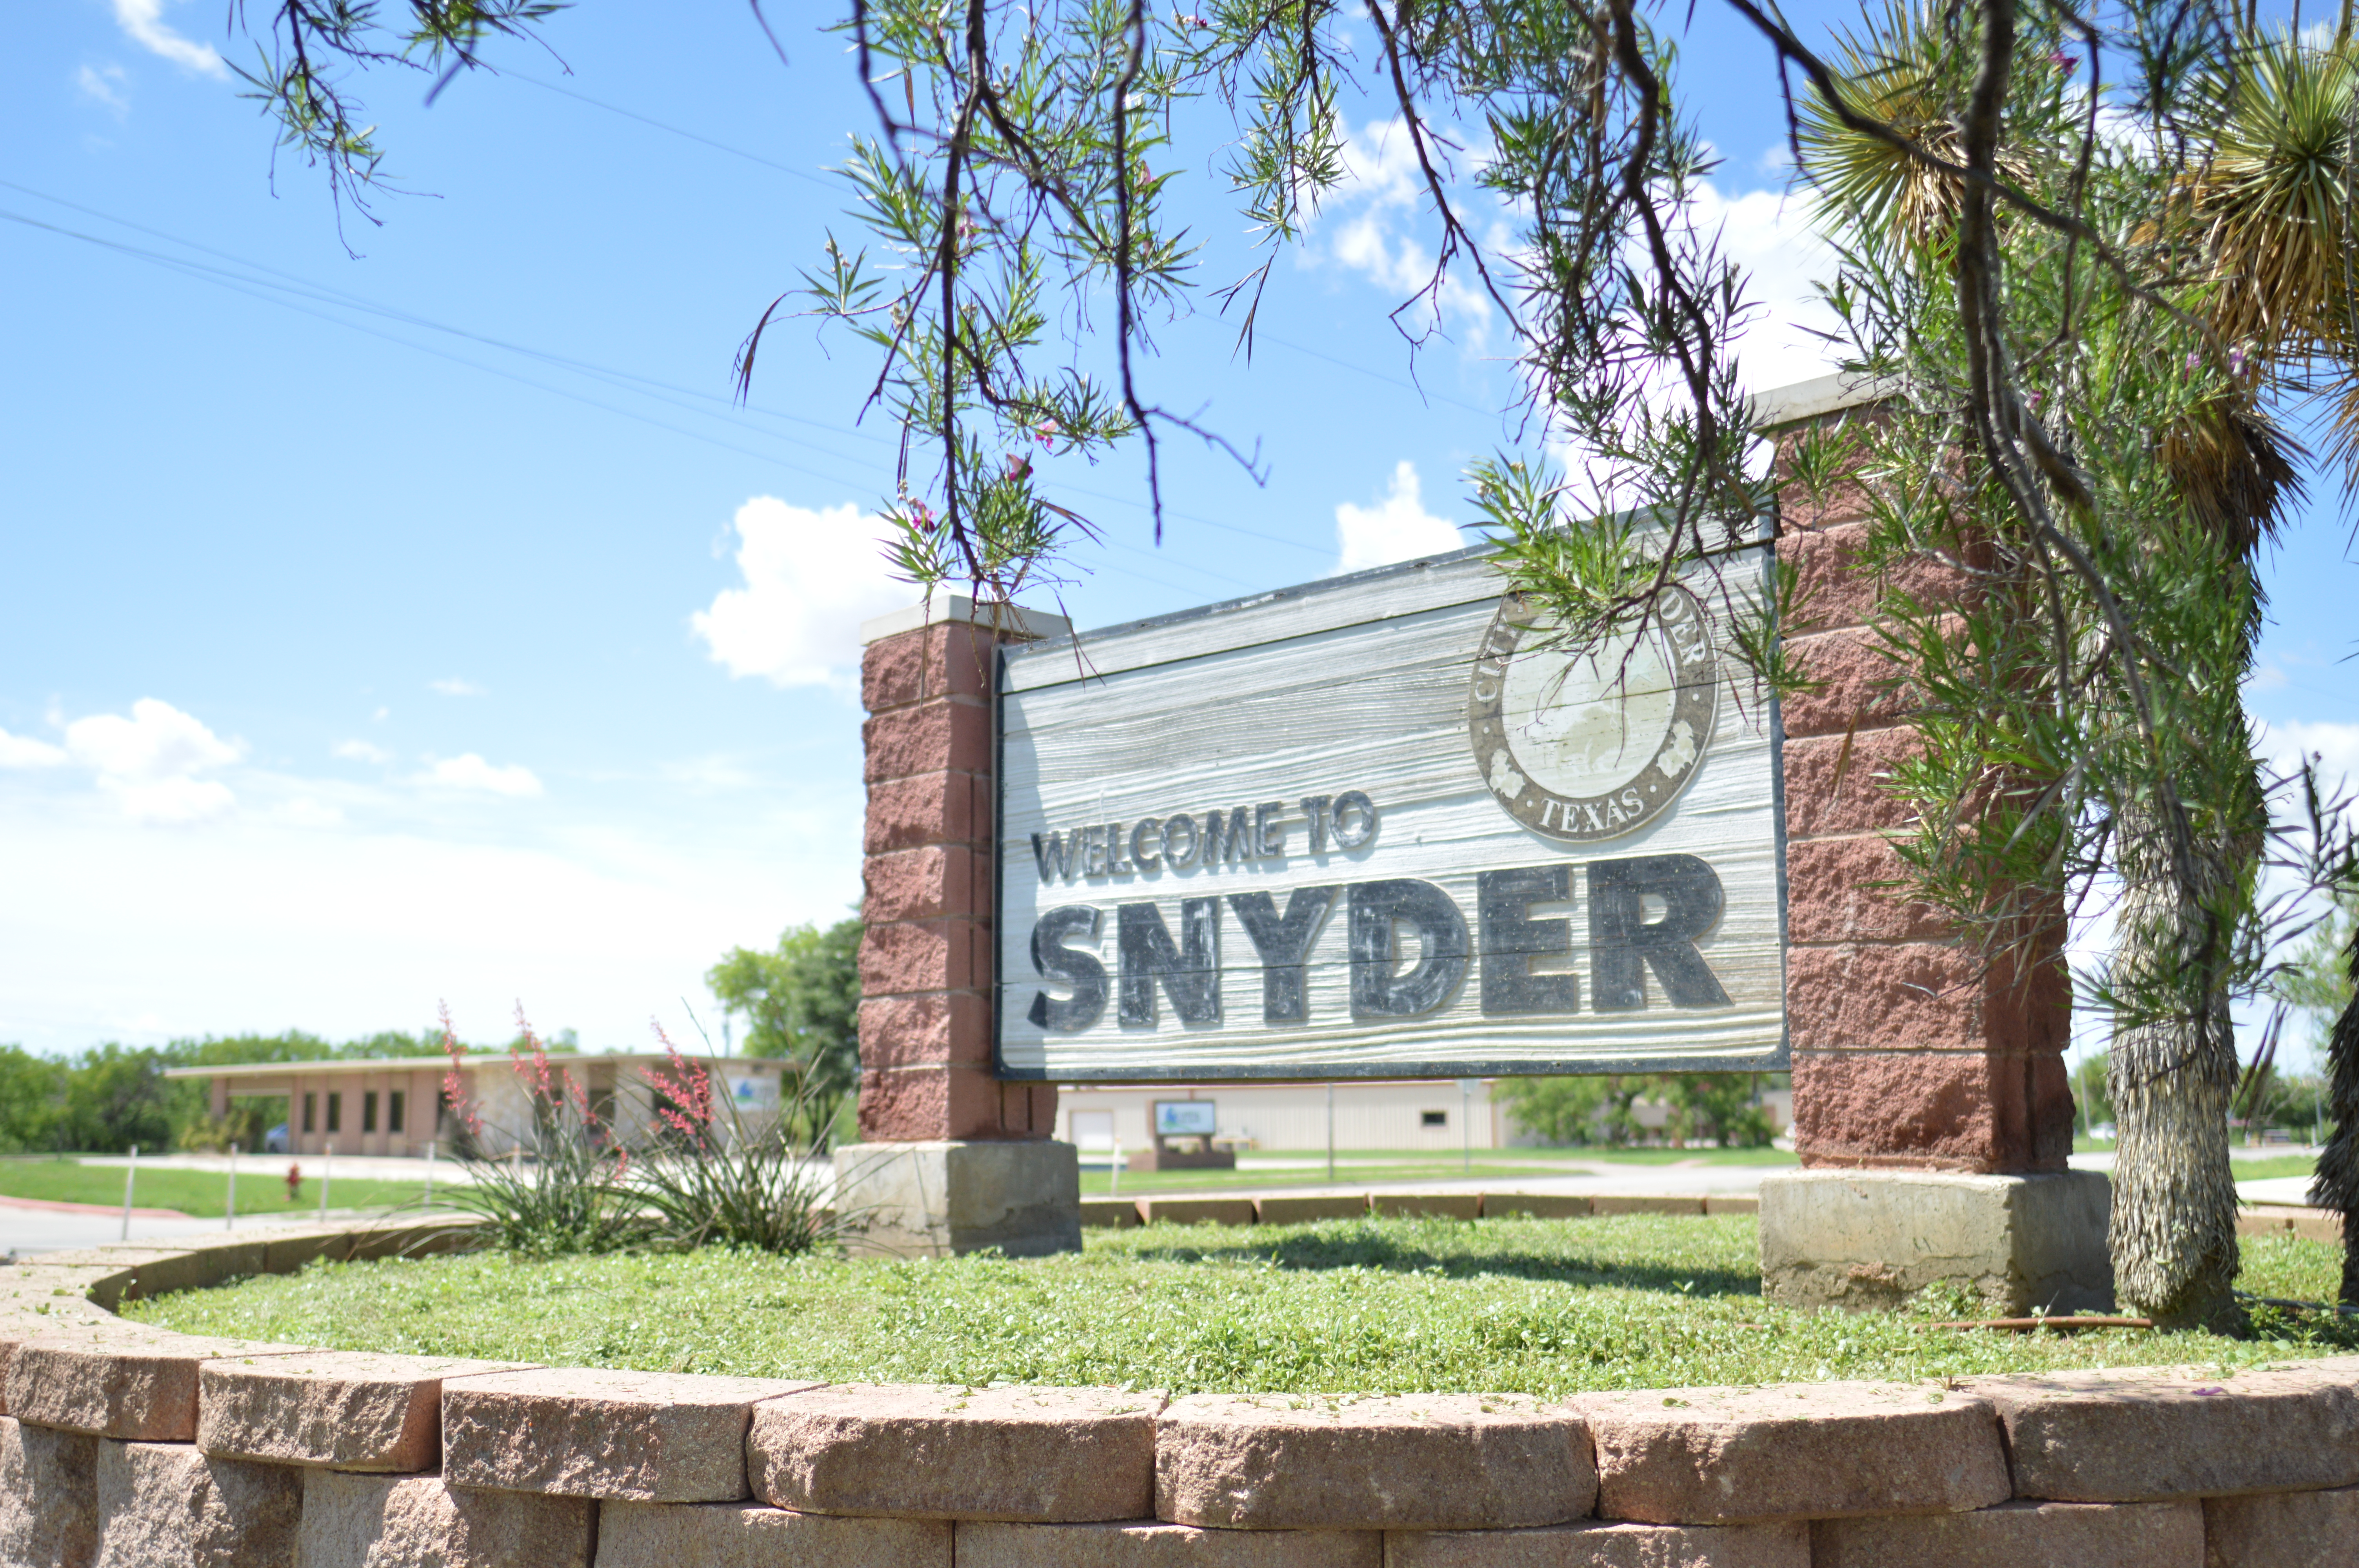 Snyder, TX City Council Approves Broadband Fiber; Small Business Support Initiative